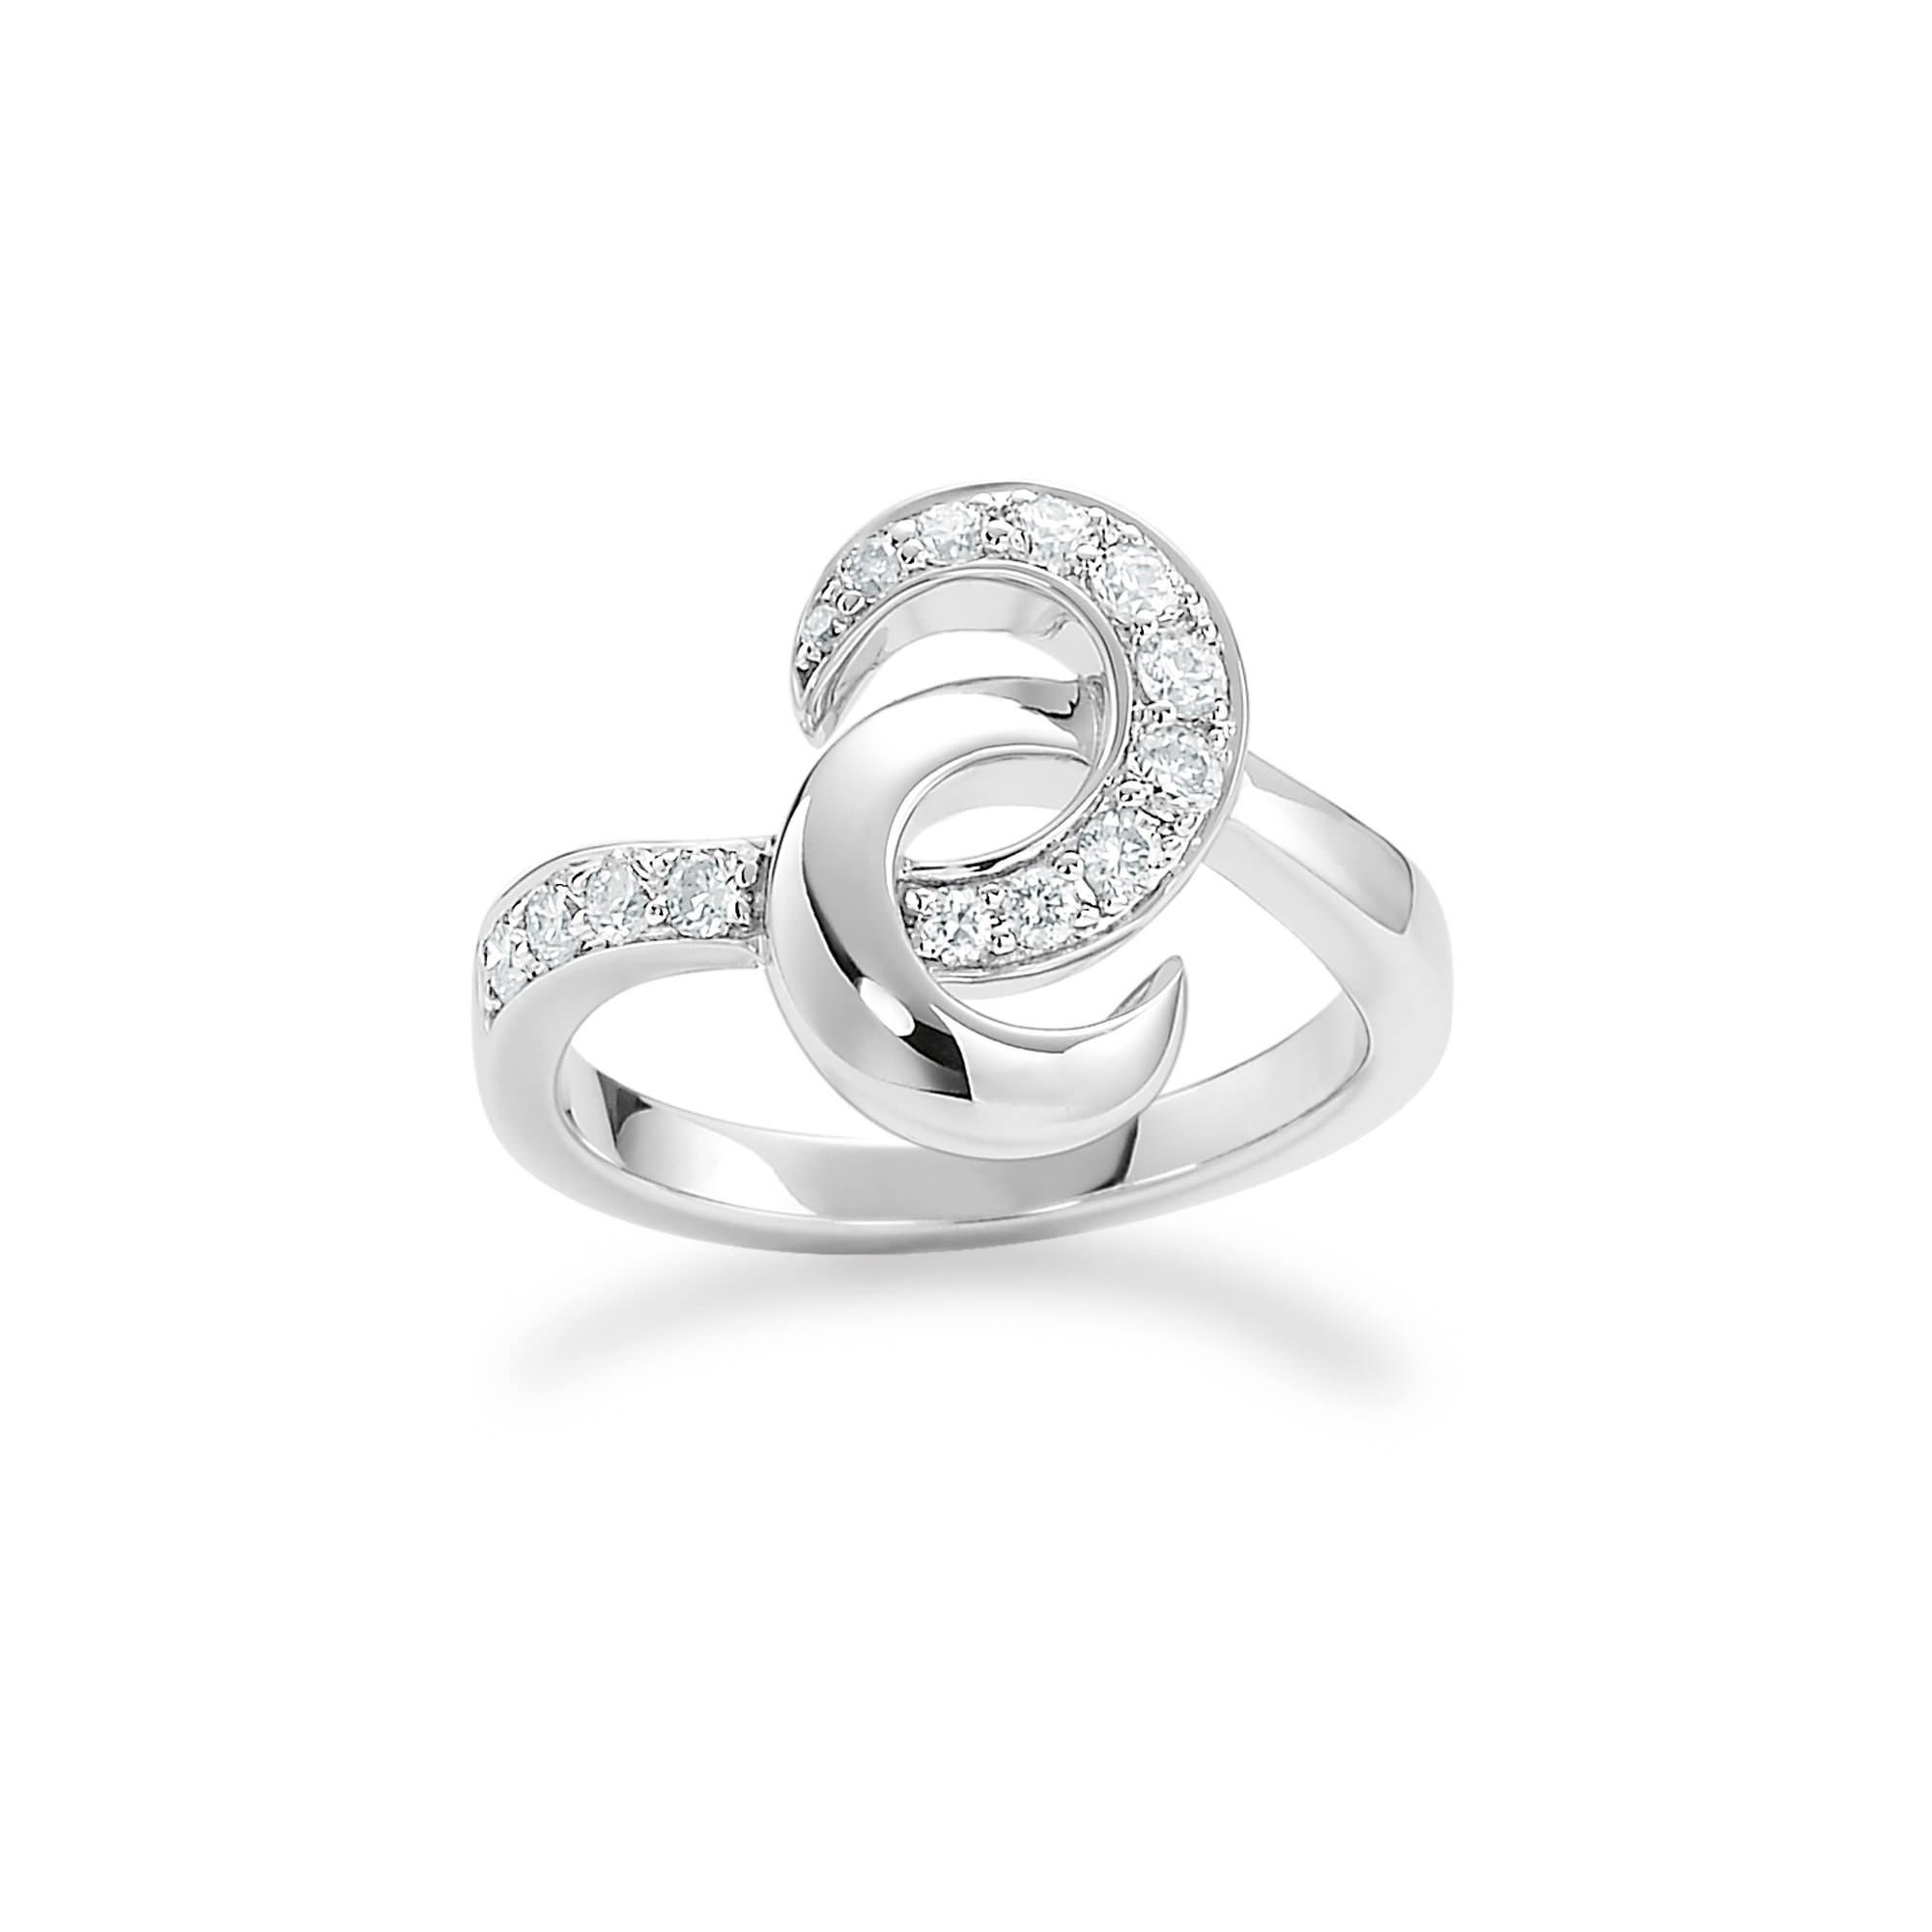 Hooked on You White Gold Diamond Ring